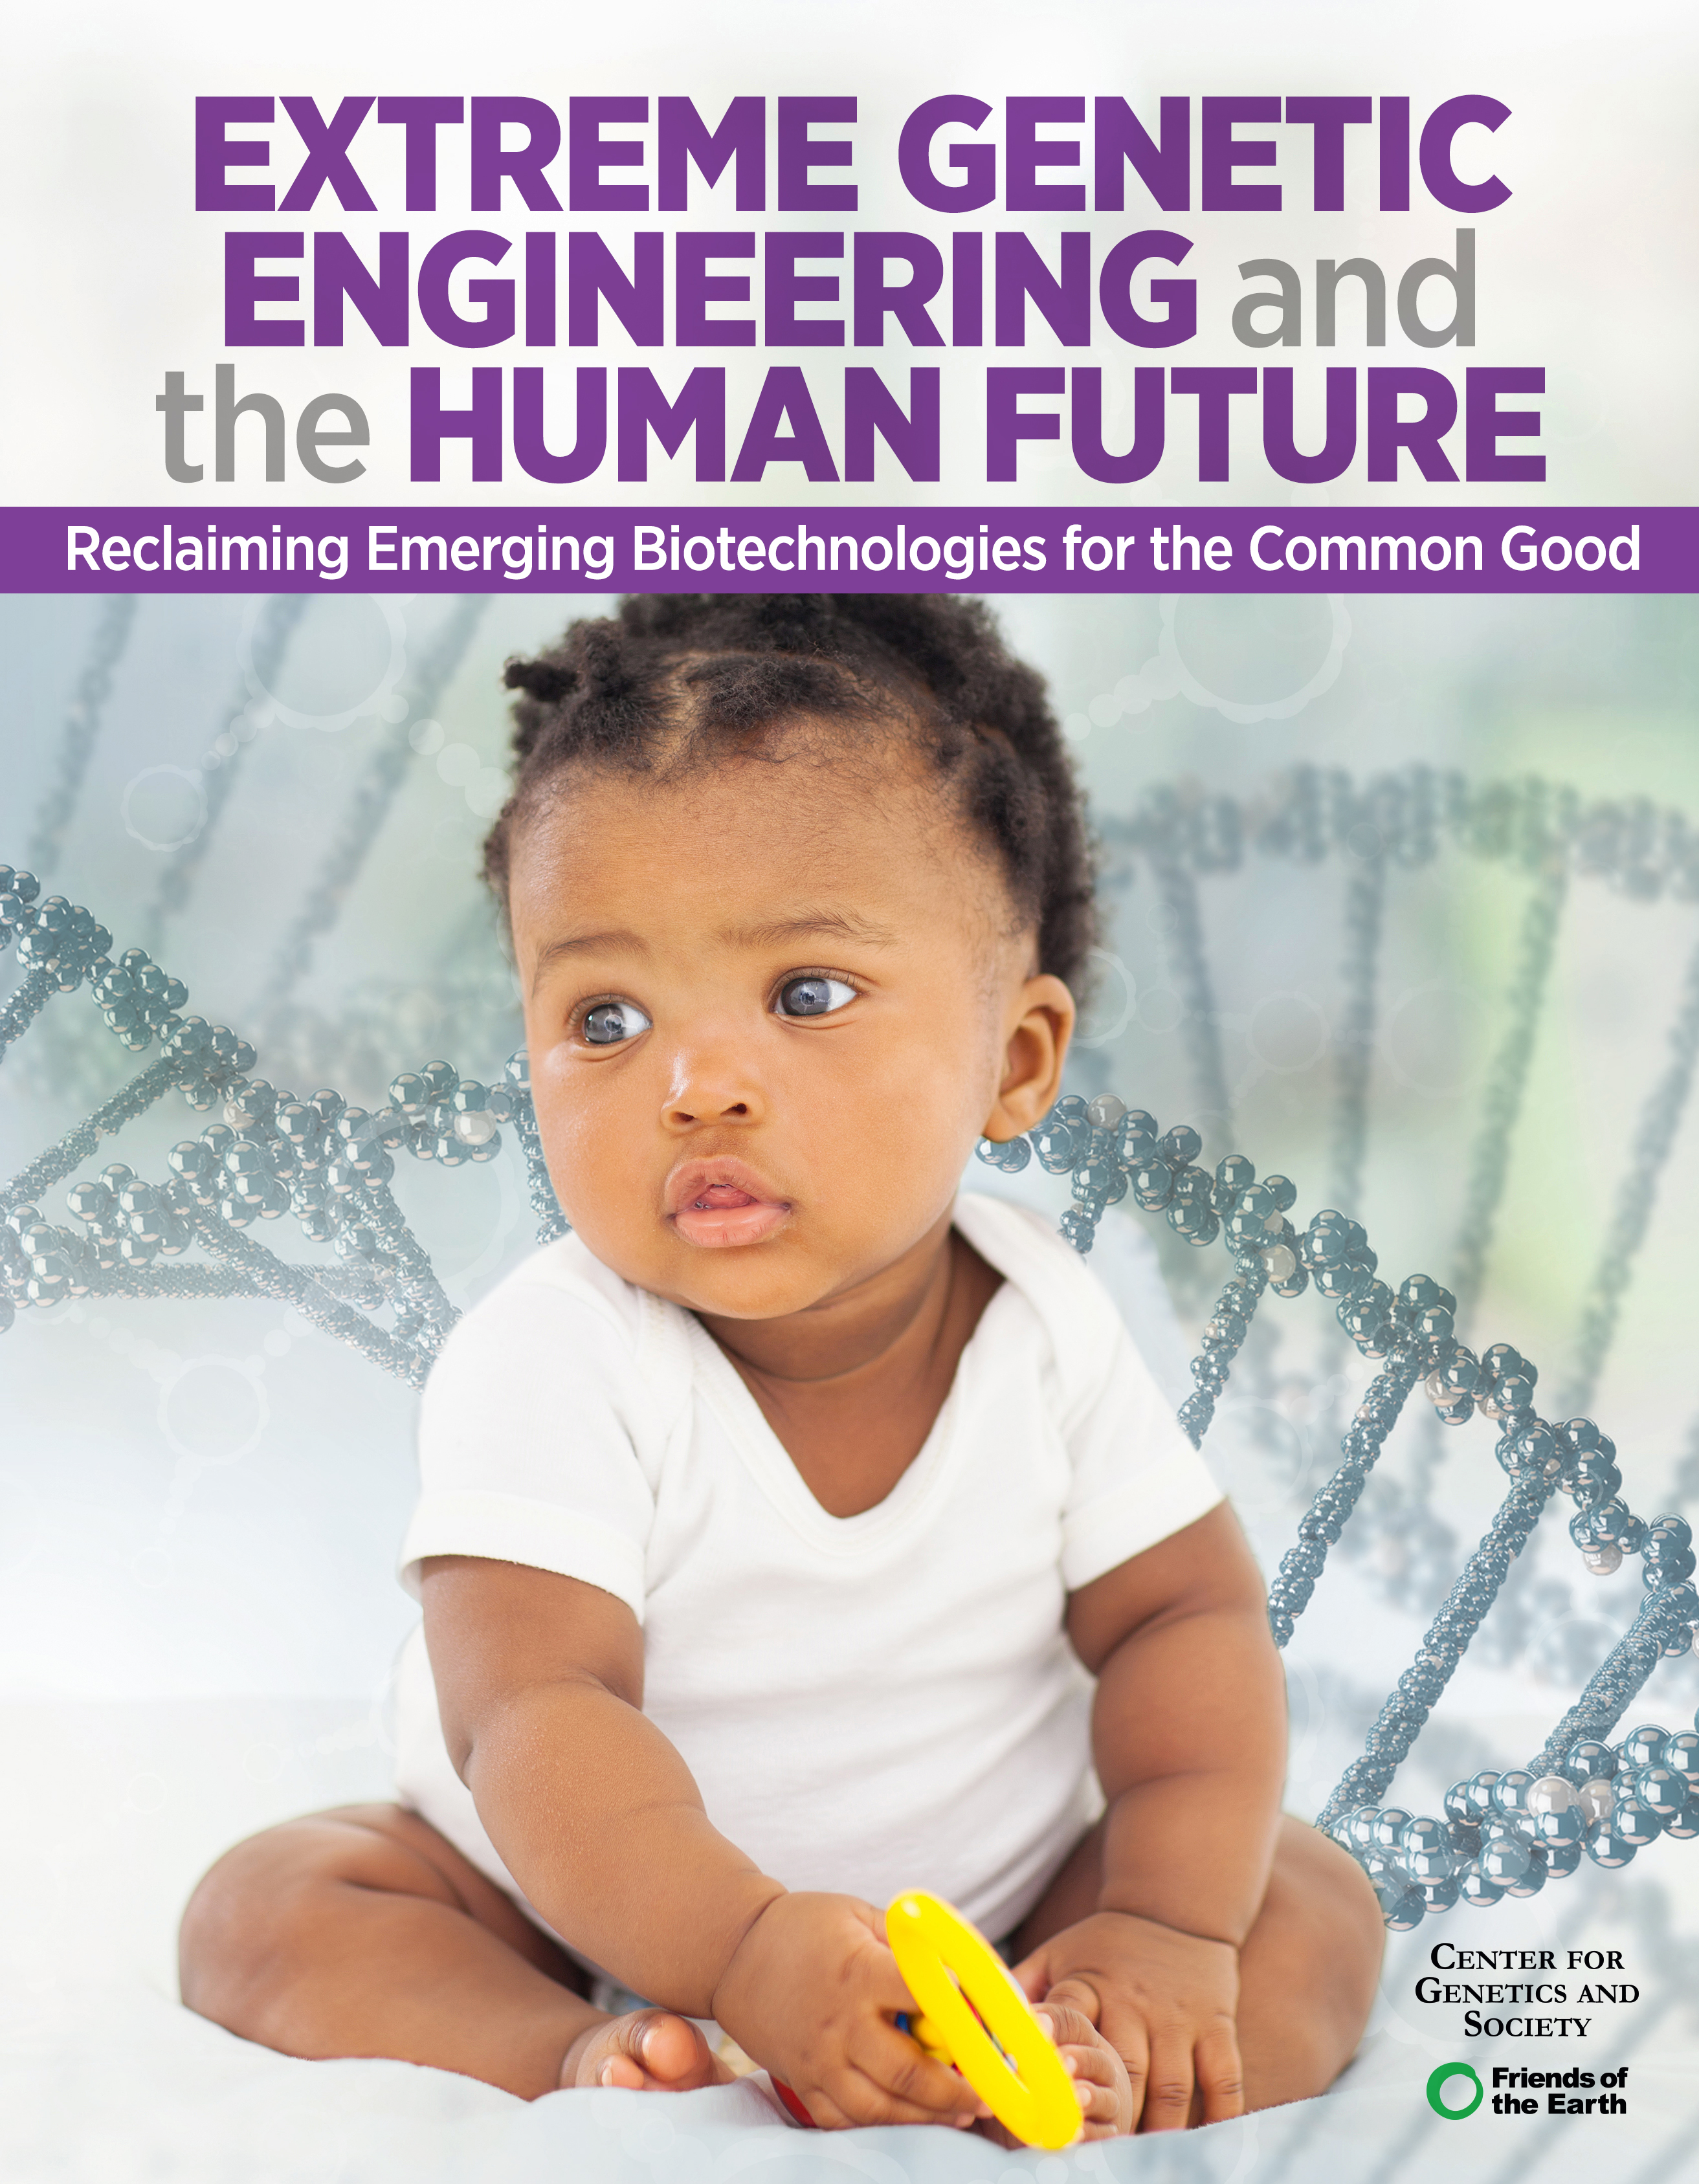 Extreme genetic engineering and the human future: reclaiming emerging biotechnologies for the common good